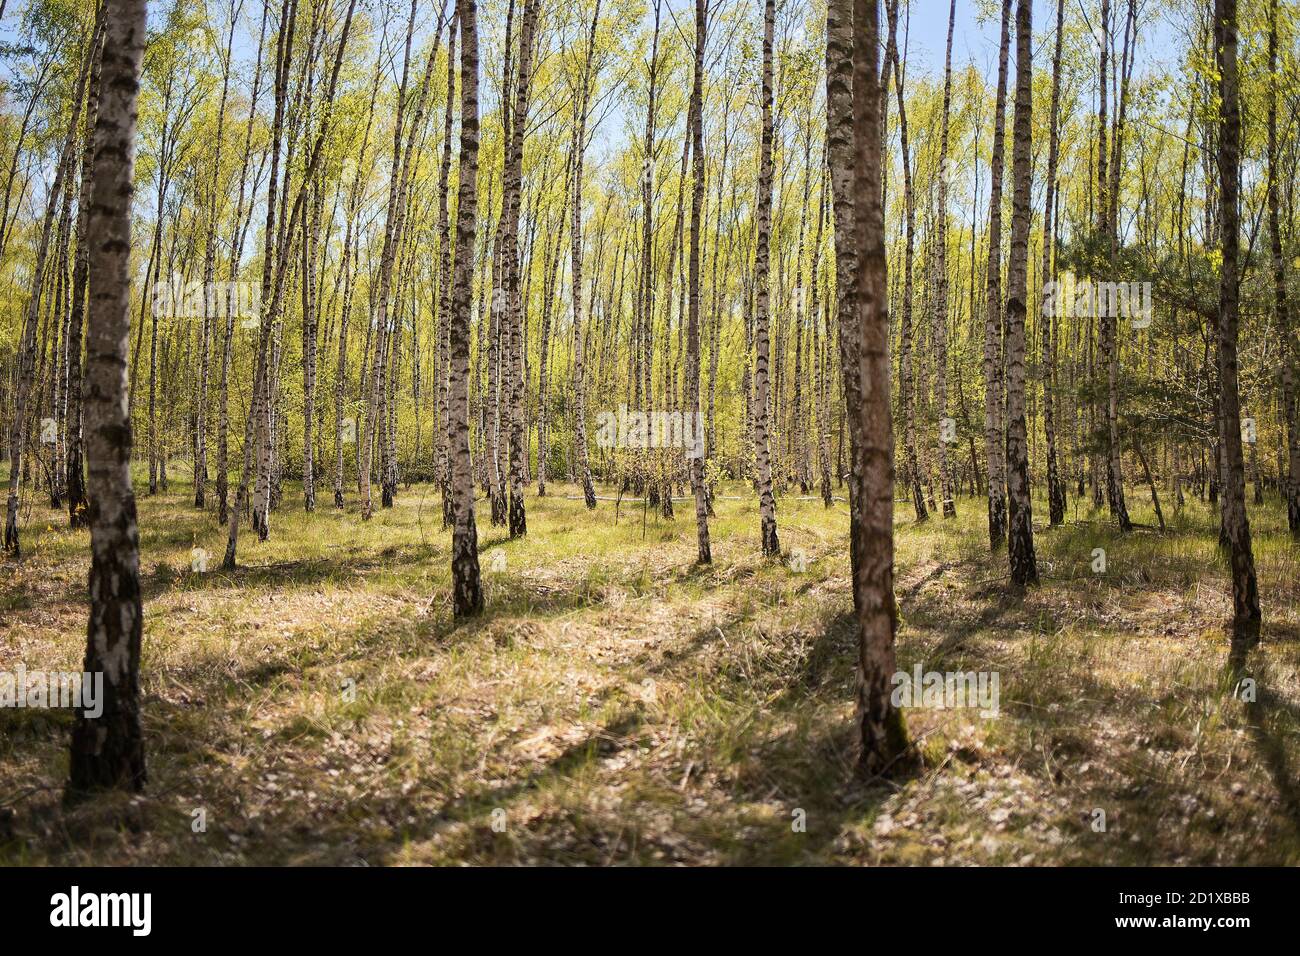 Birch forest in spring Stock Photo